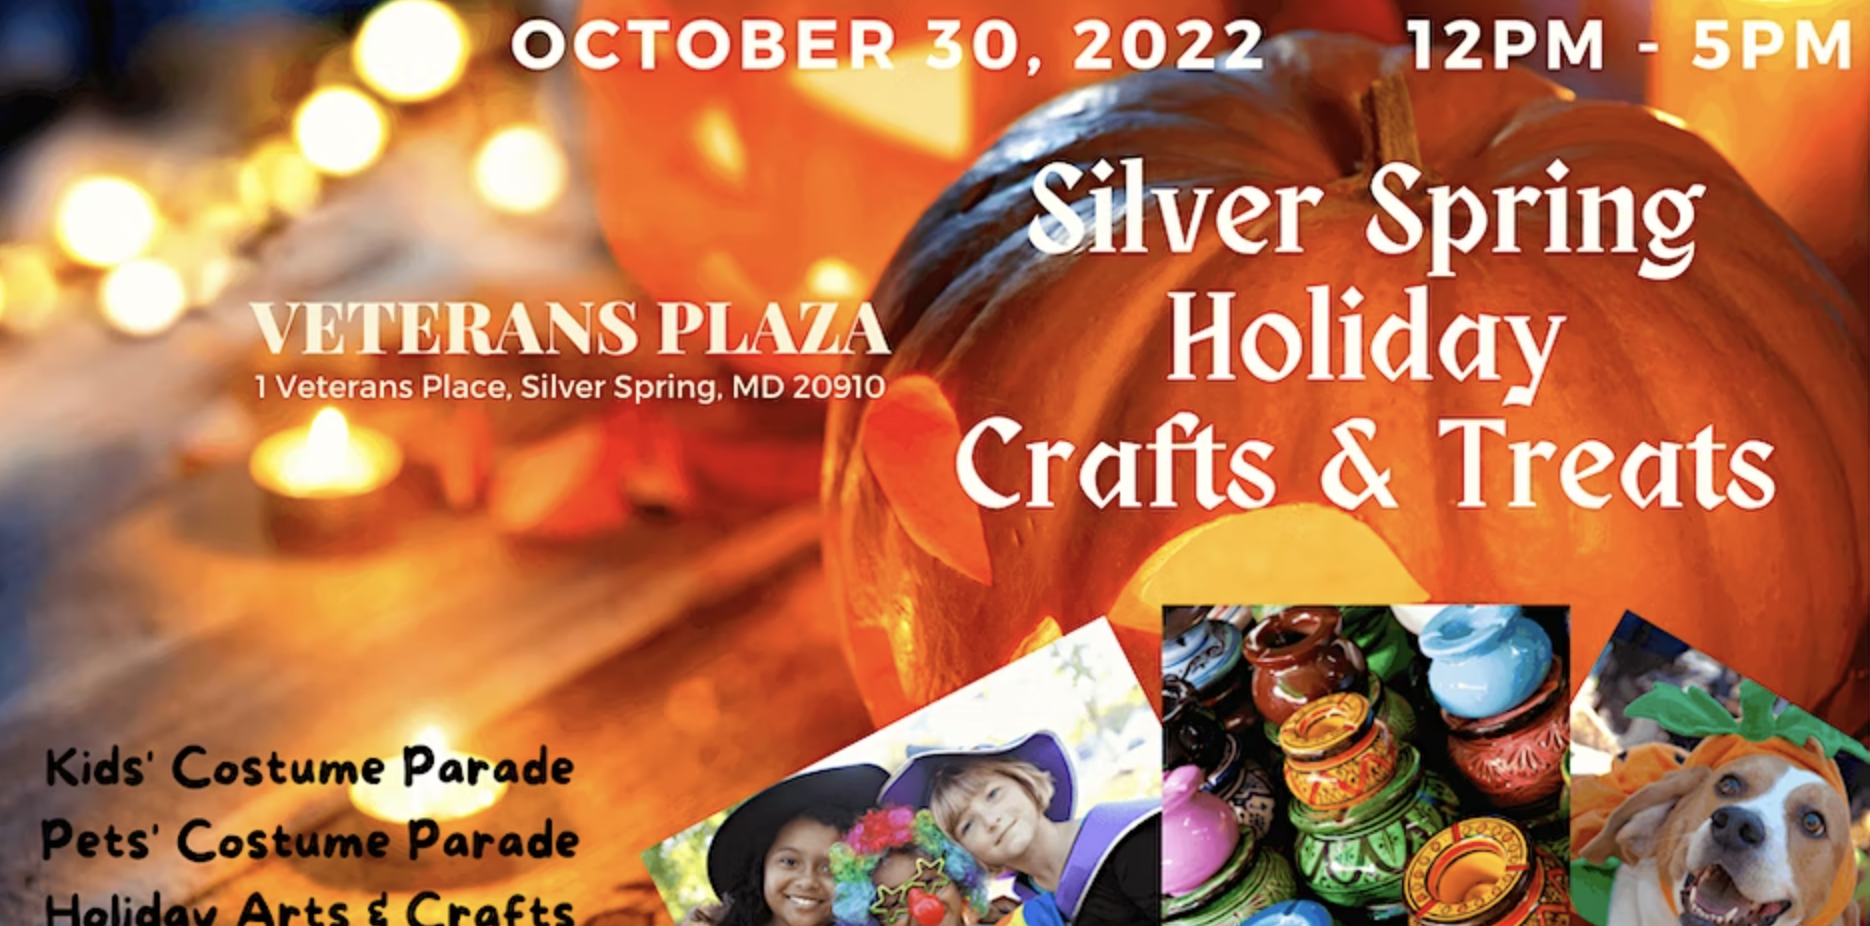 Silver Spring Holiday Crafts and Treats